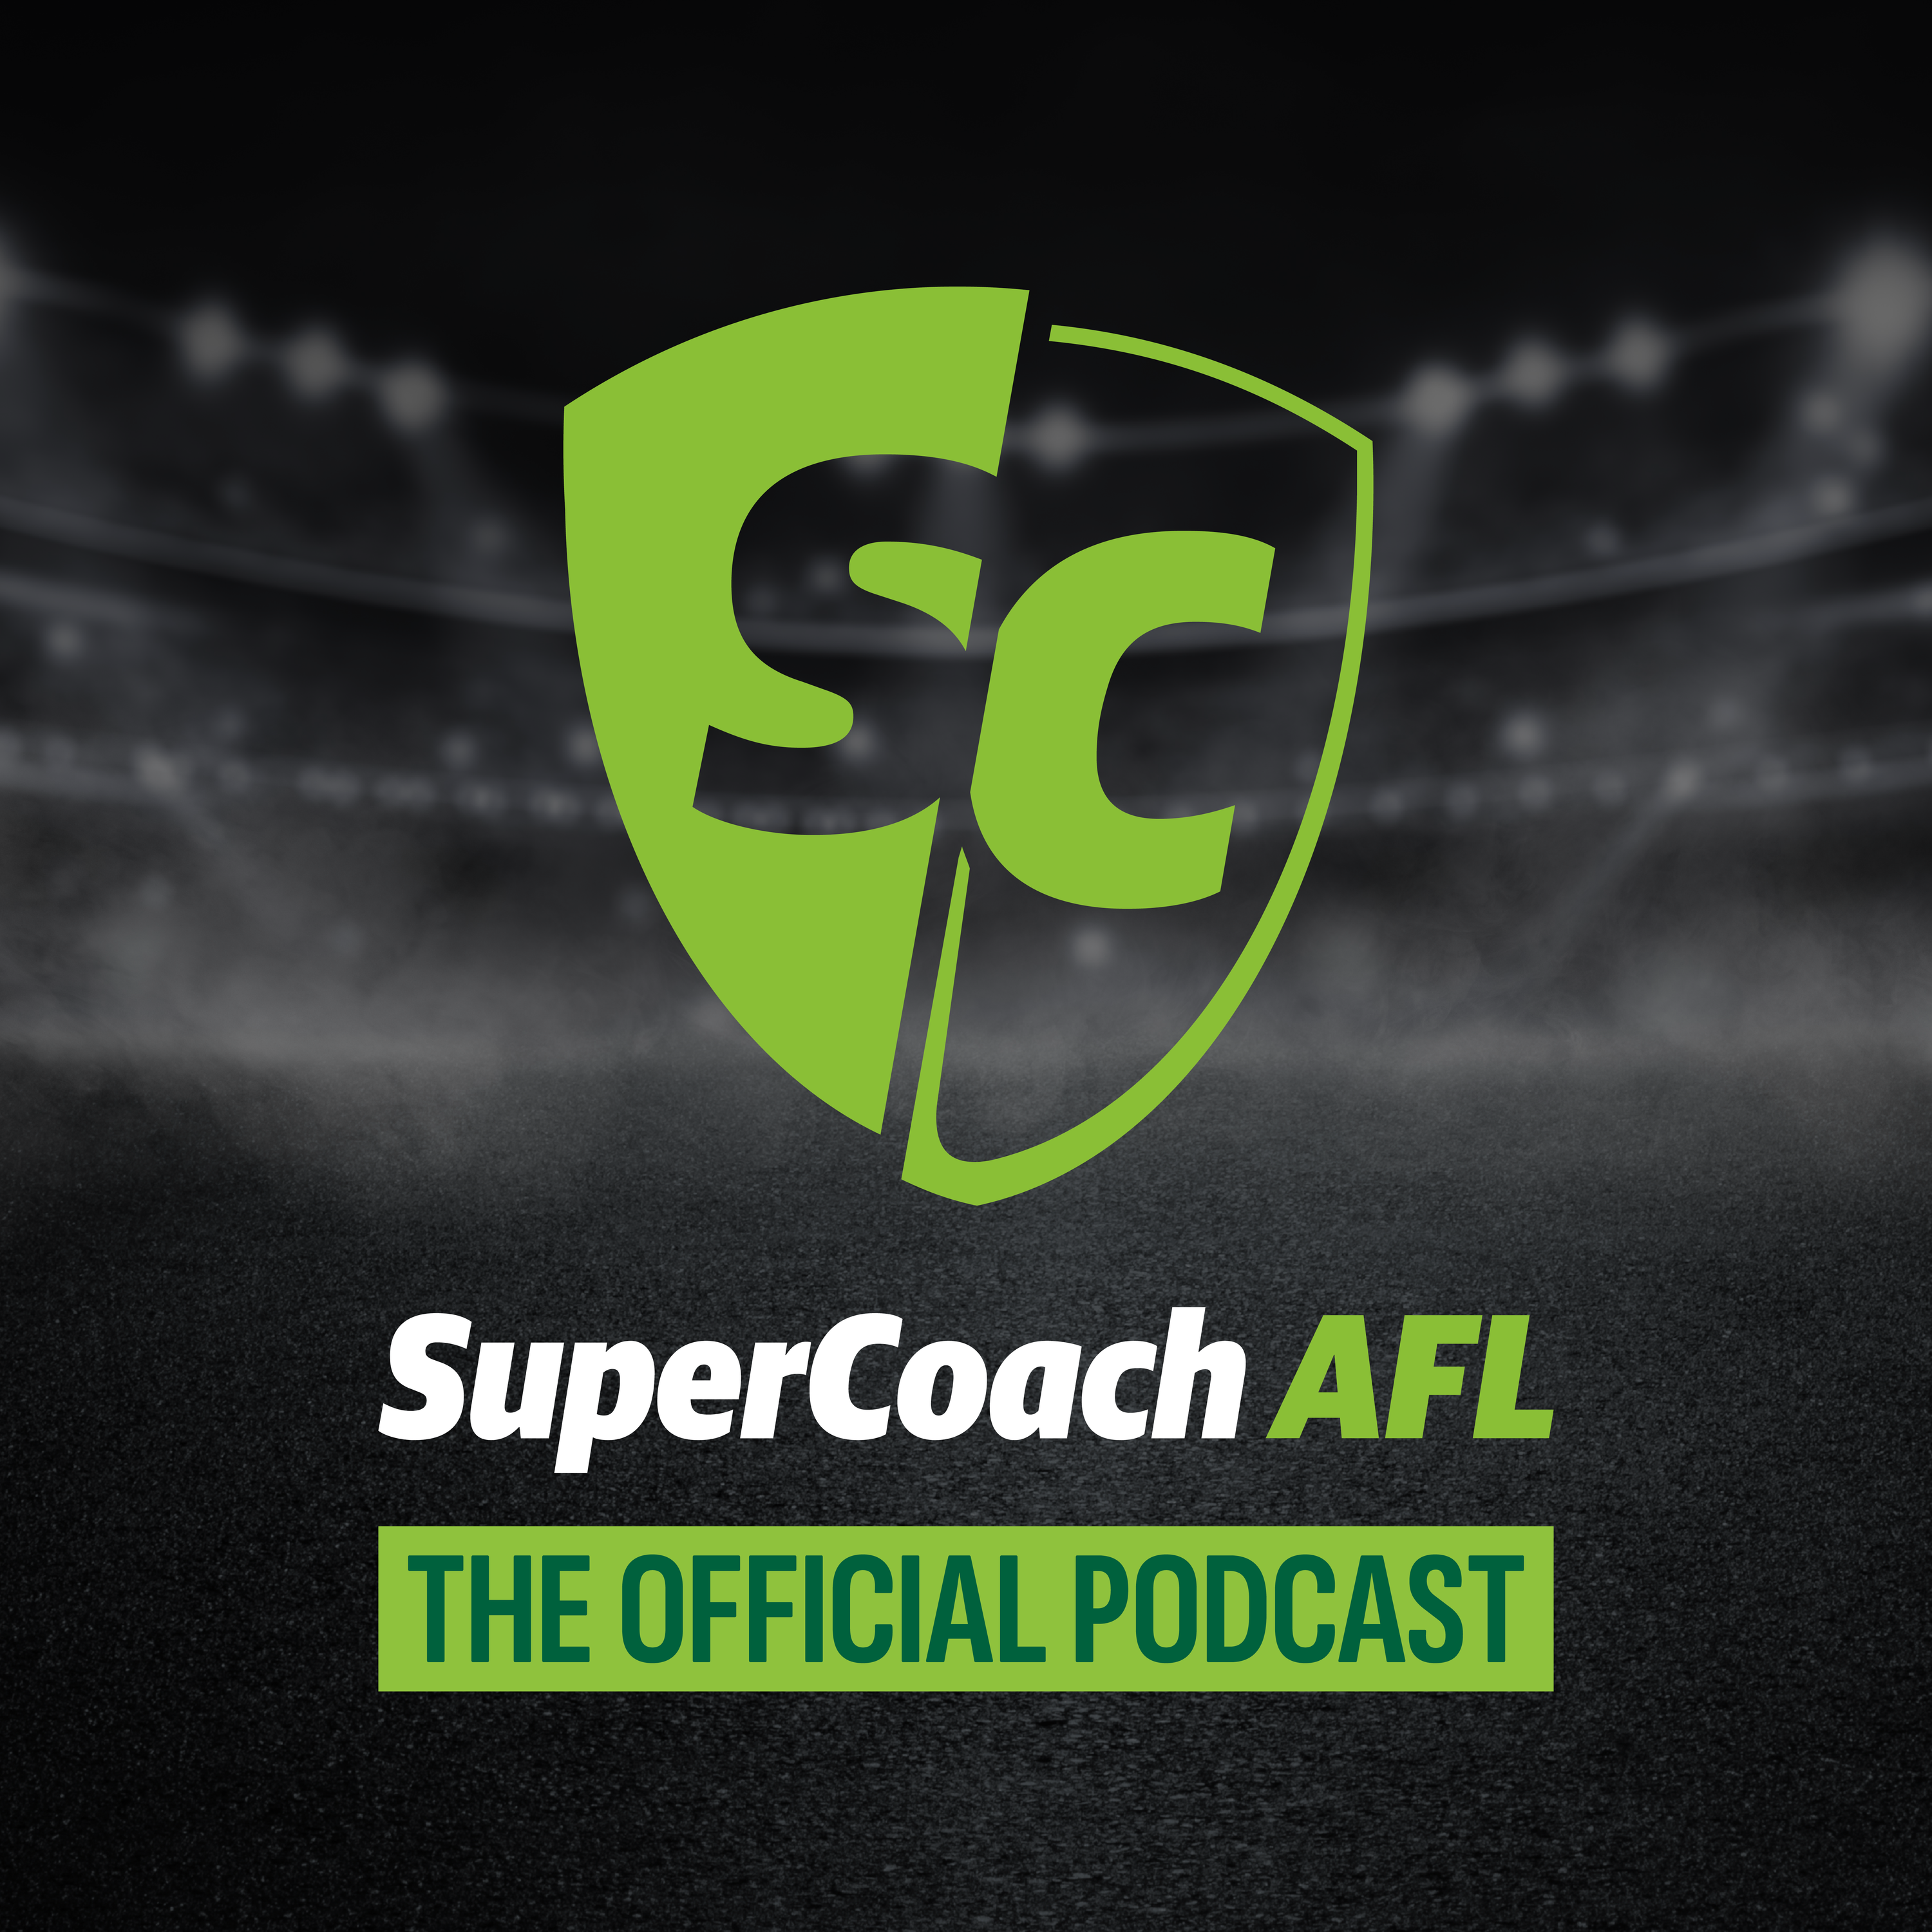 SuperCoach: The final round 1 countdown